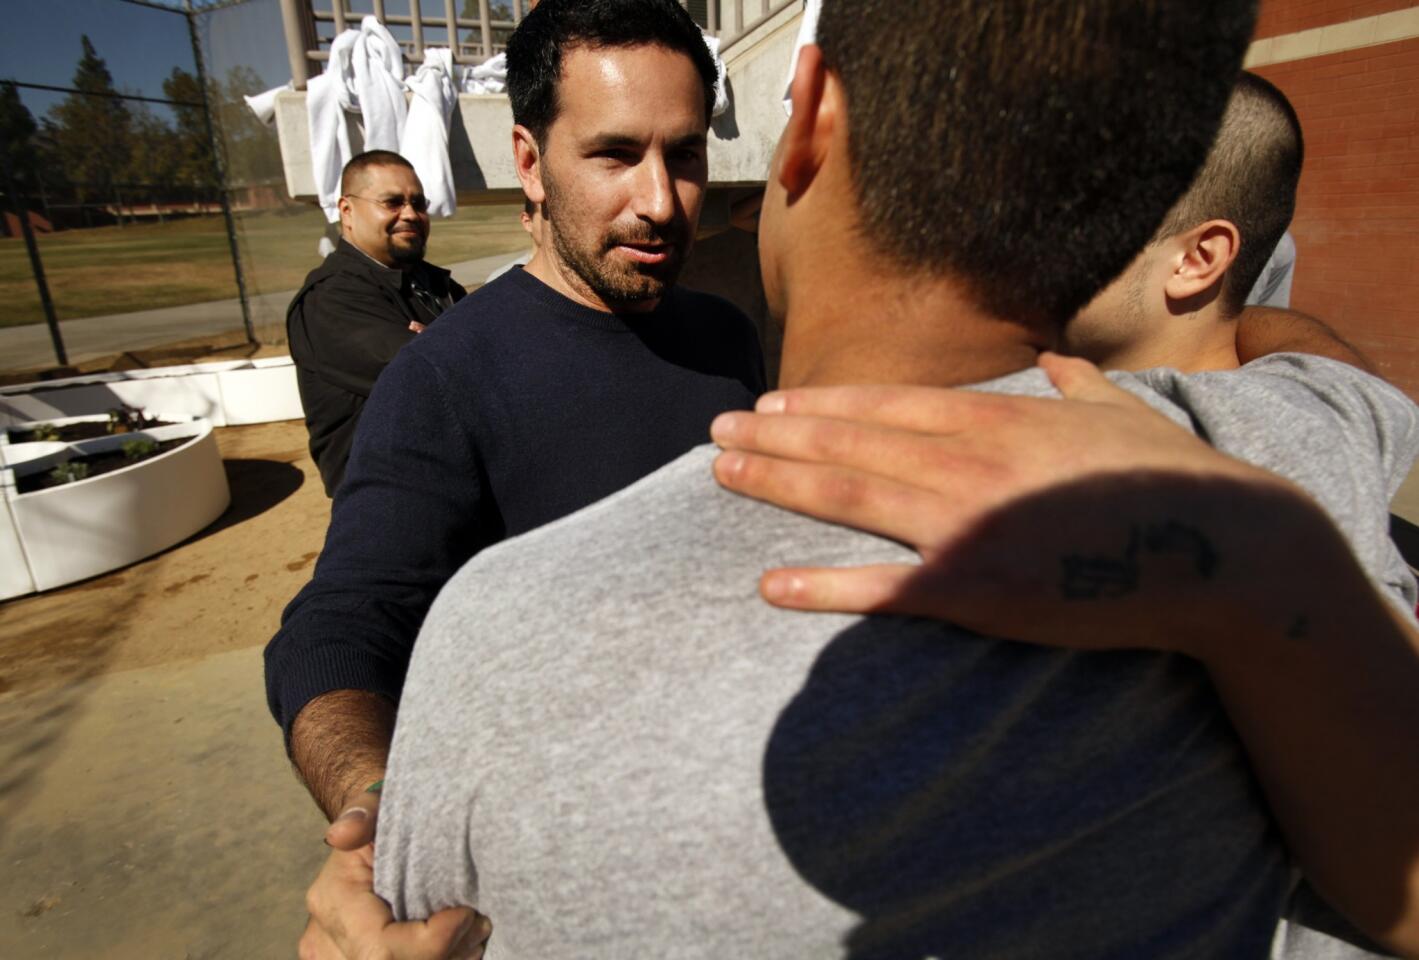 Scott Budnick, left, producer of the "Hangover" movies, chats with youths at the Barry J. Nidorf Juvenile Hall in Sylmar. Budnick, who is passionate about social justice issues, became involved with InsideOut Writers, a volunteer creative-writing program in the county's juvenile halls.